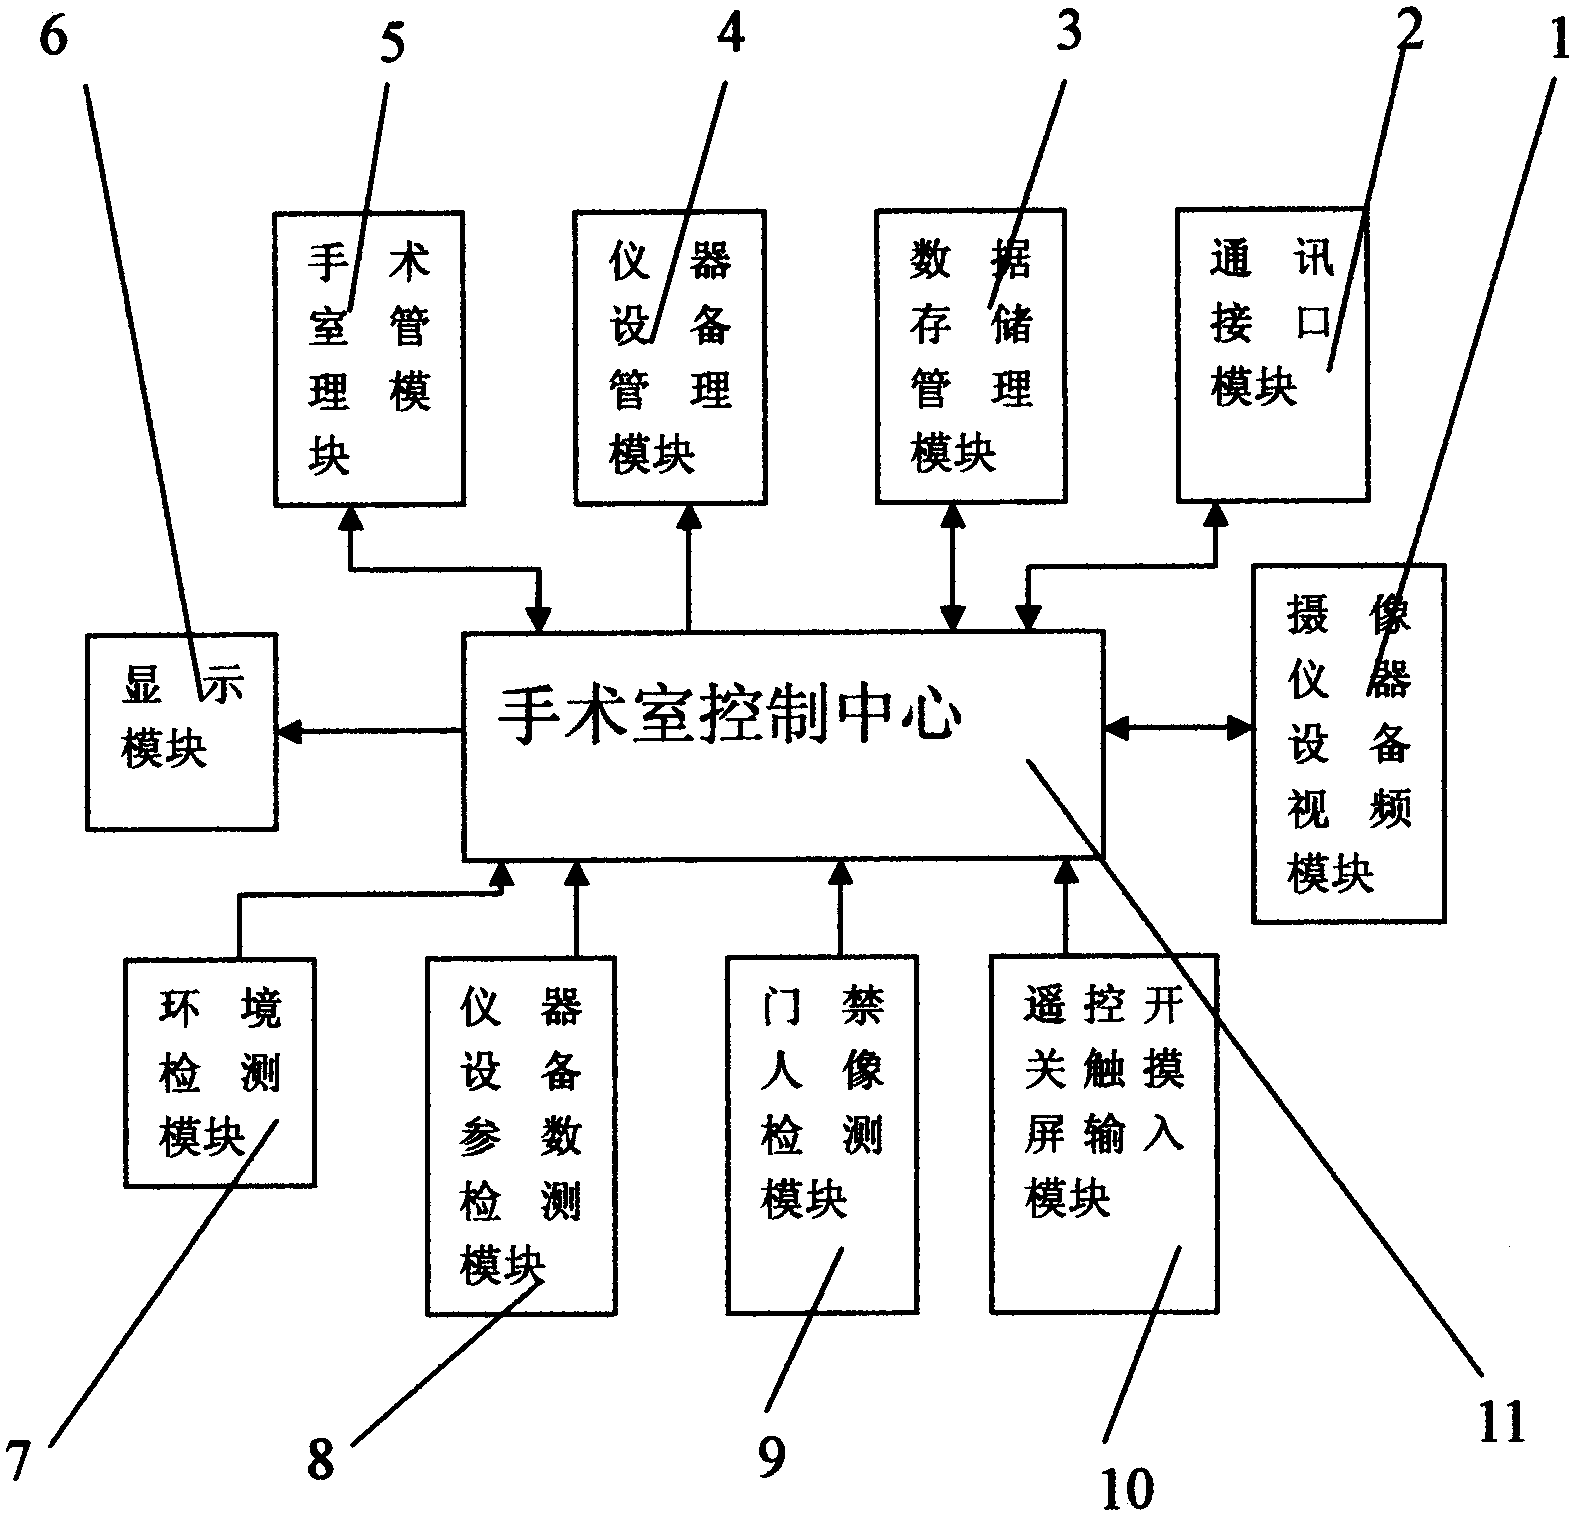 Operating room information acquisition and control system